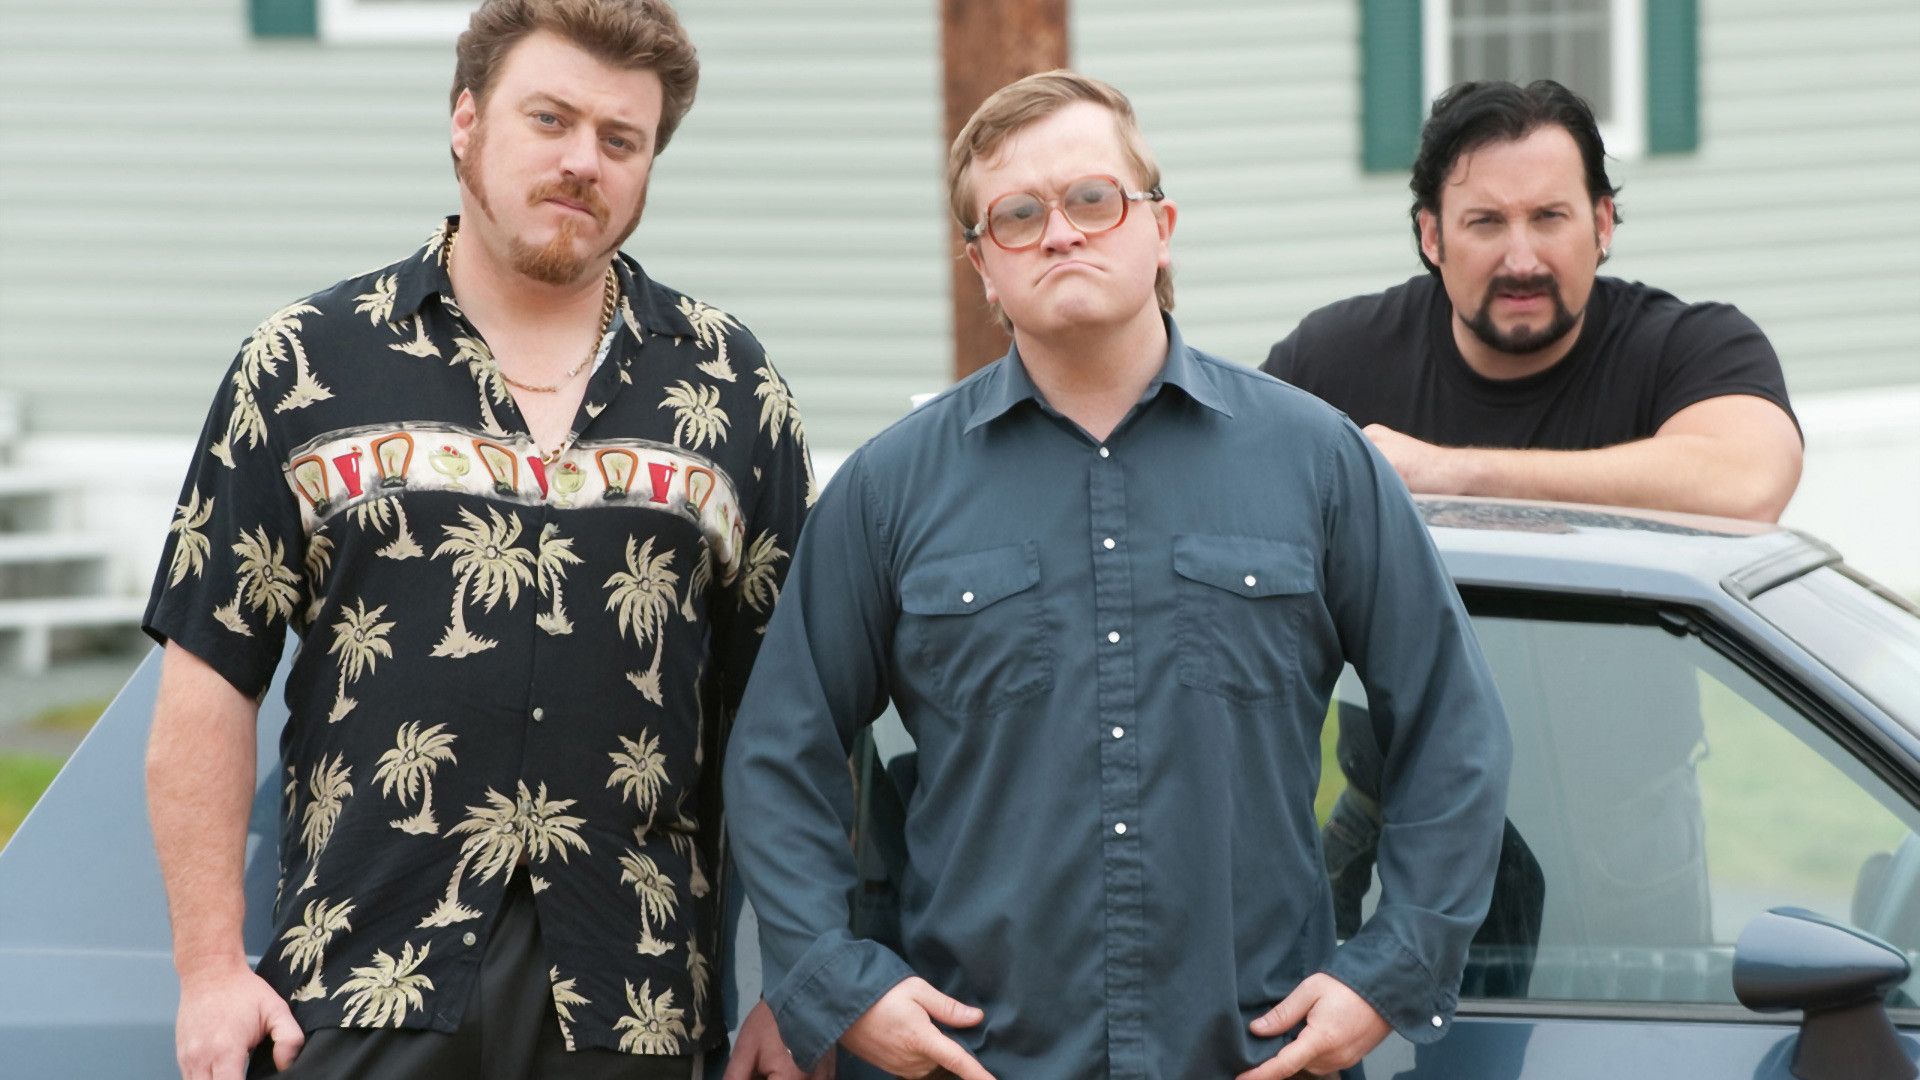 Trailer Park Boys Season 9 Release Date Watch the New Trailer for